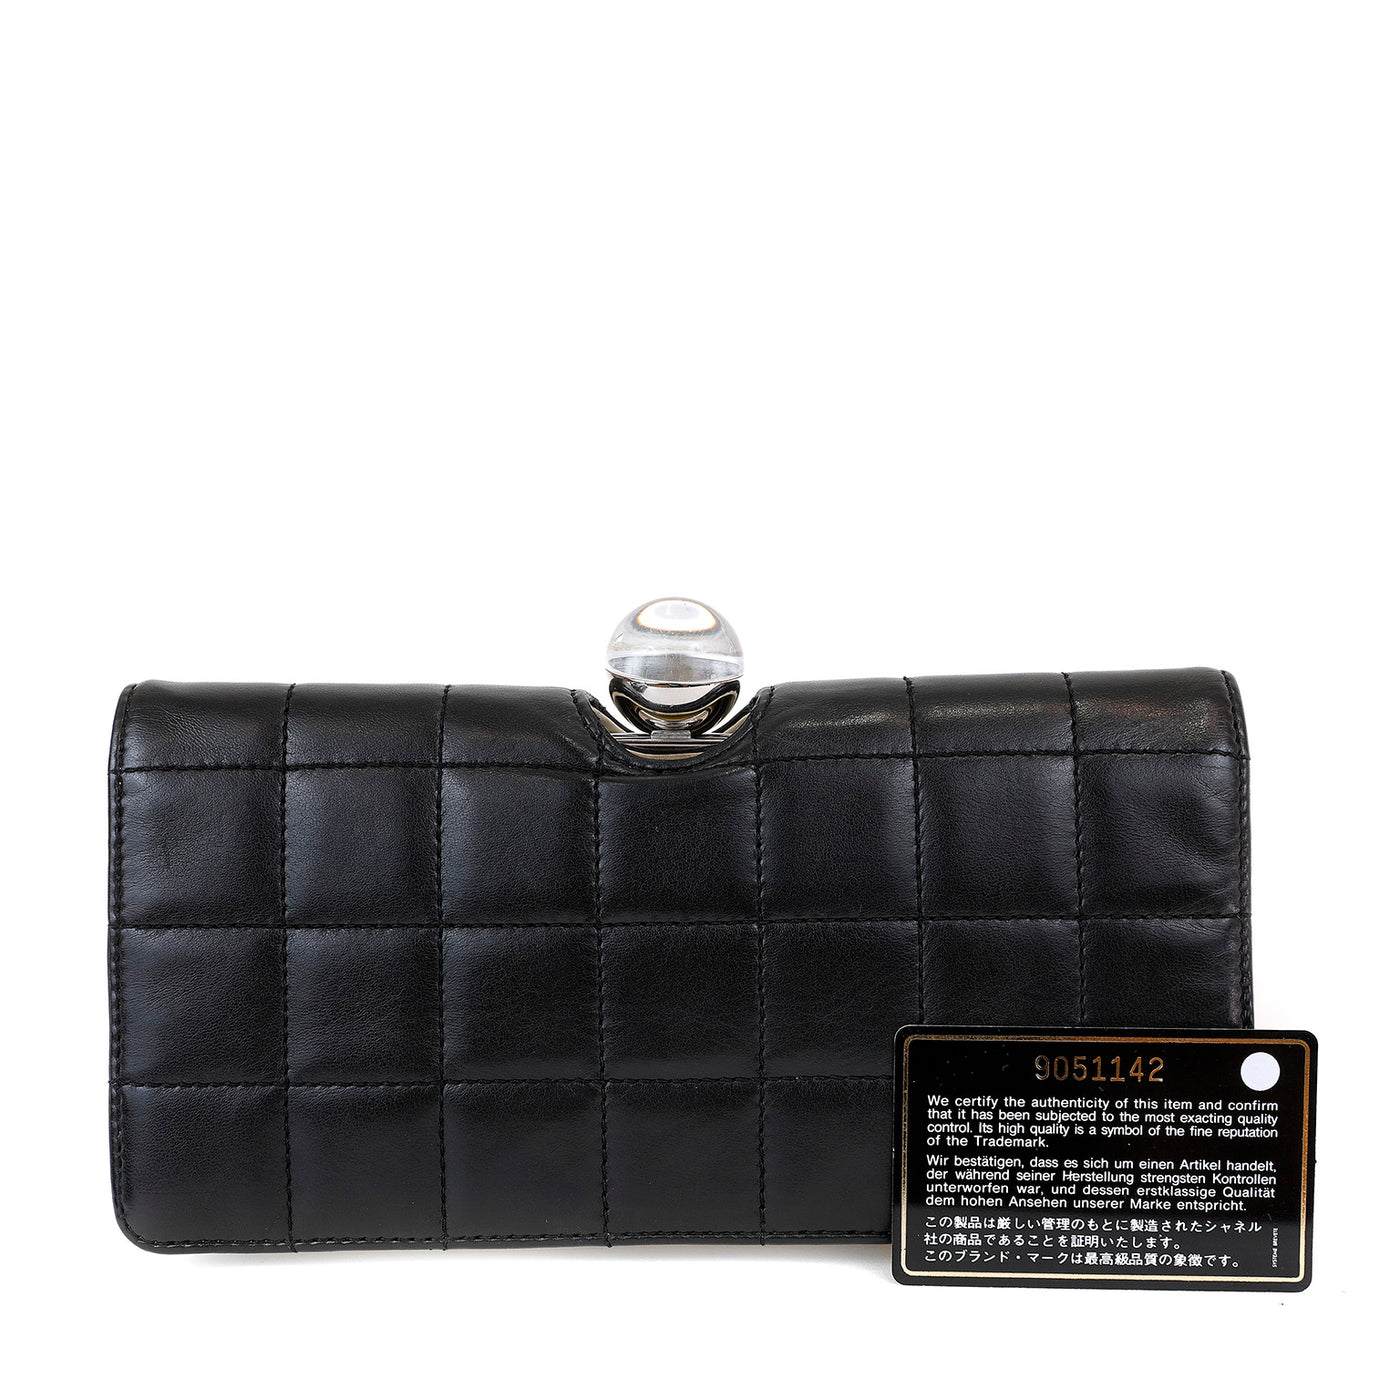 Chanel Black and White Lambskin Square Stitched Clutch with Lucite Knob